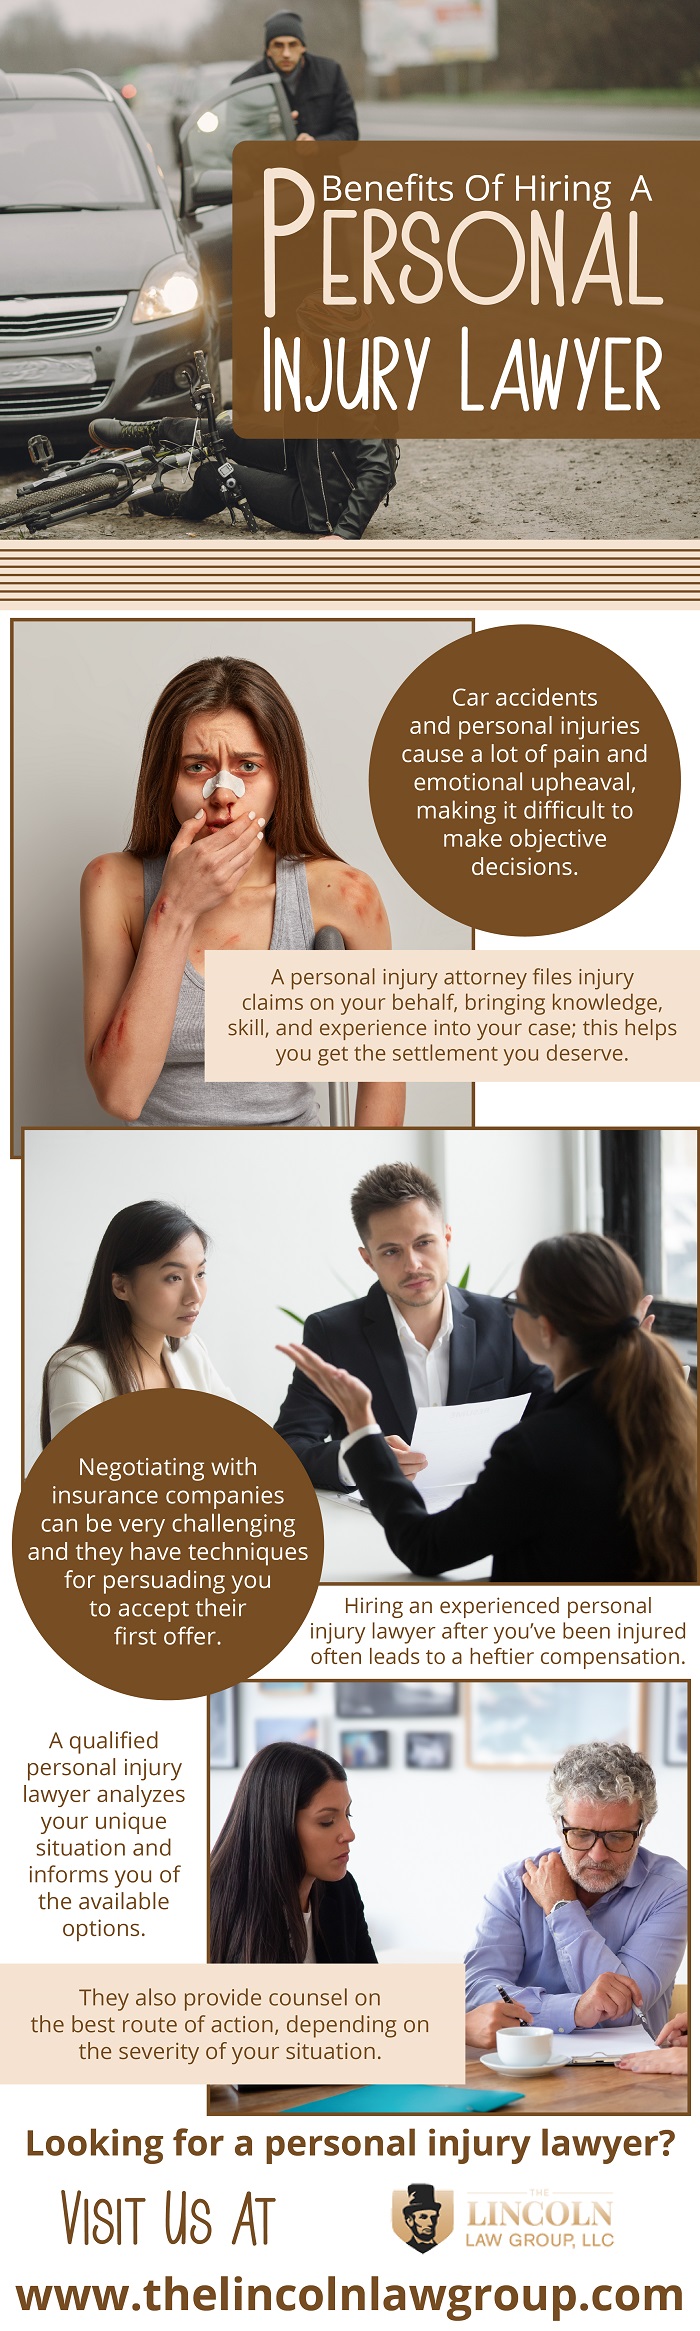 here are some benefits of hiring a personal injury lawyer